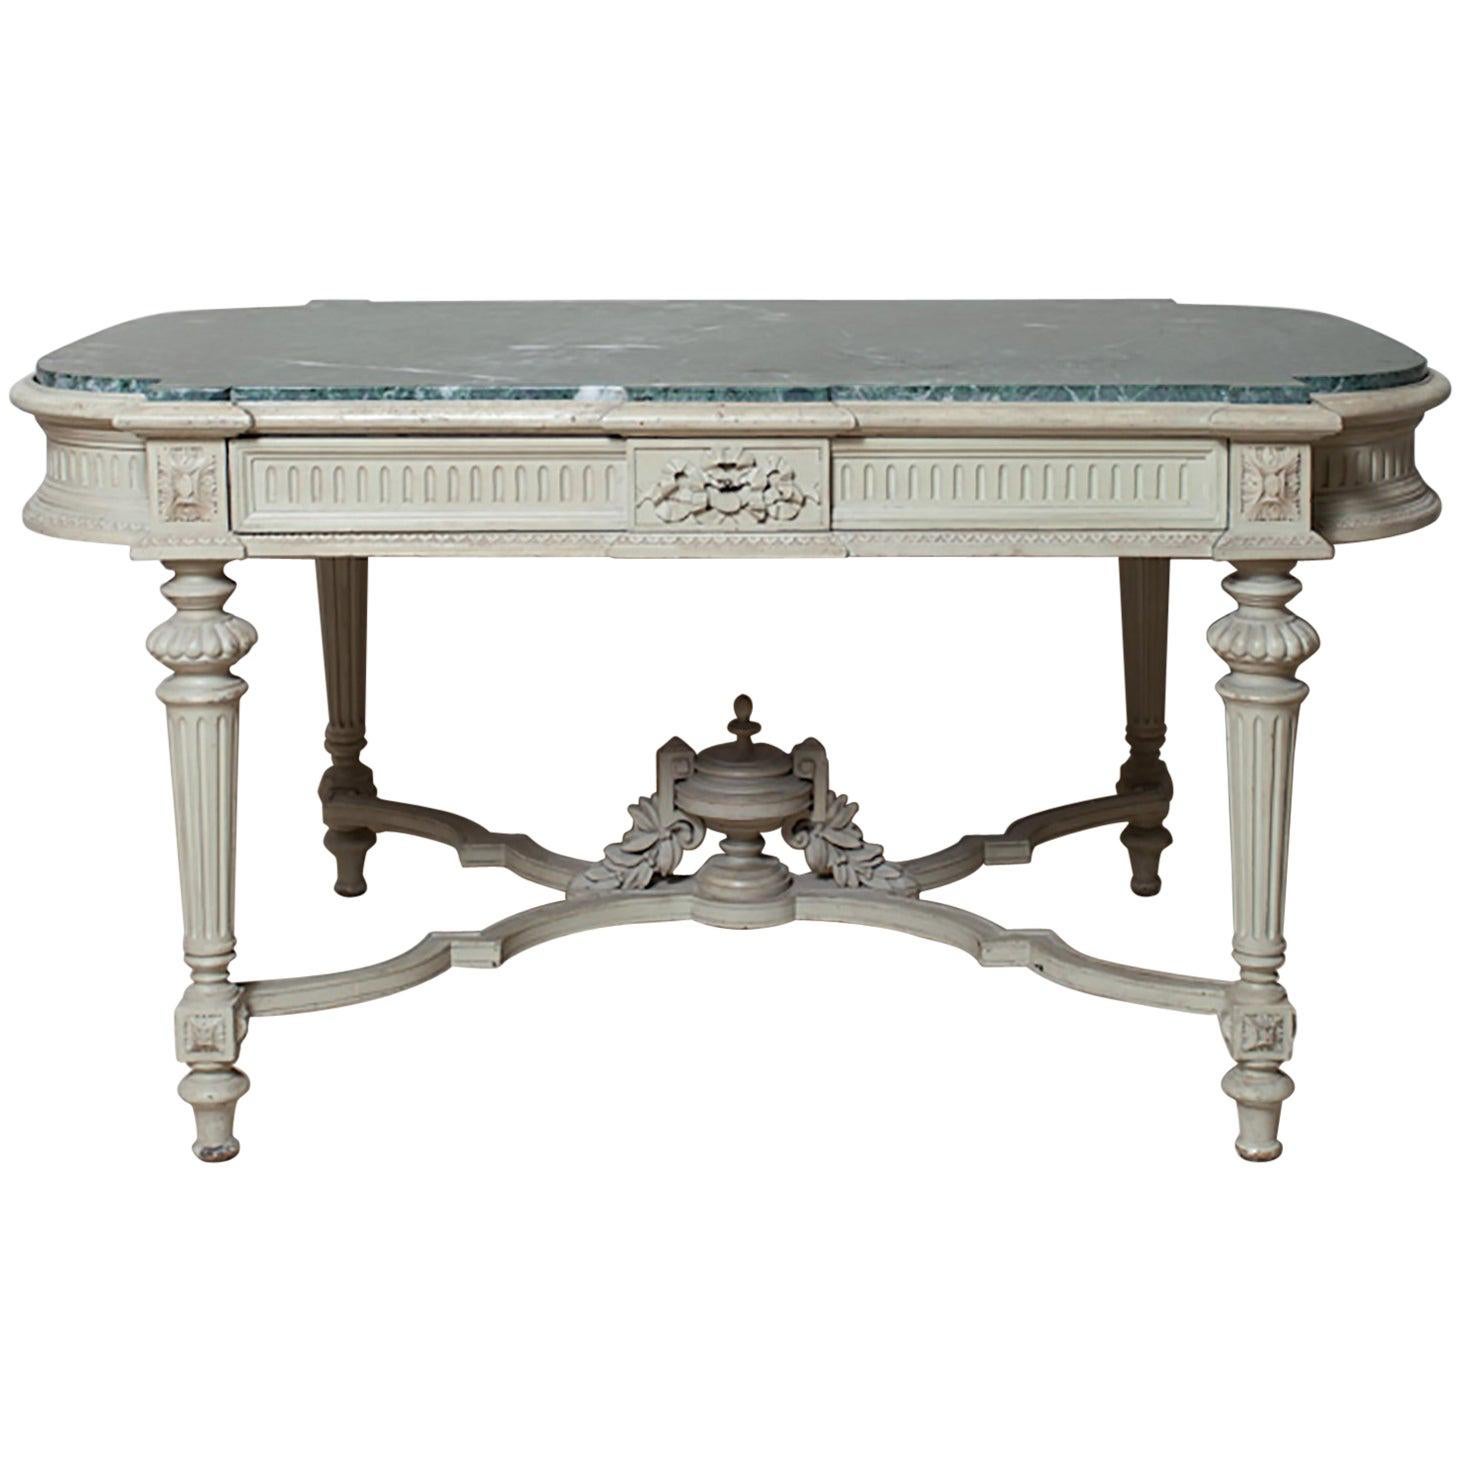 French 19th Century Louis XVI Desk or Centre Table